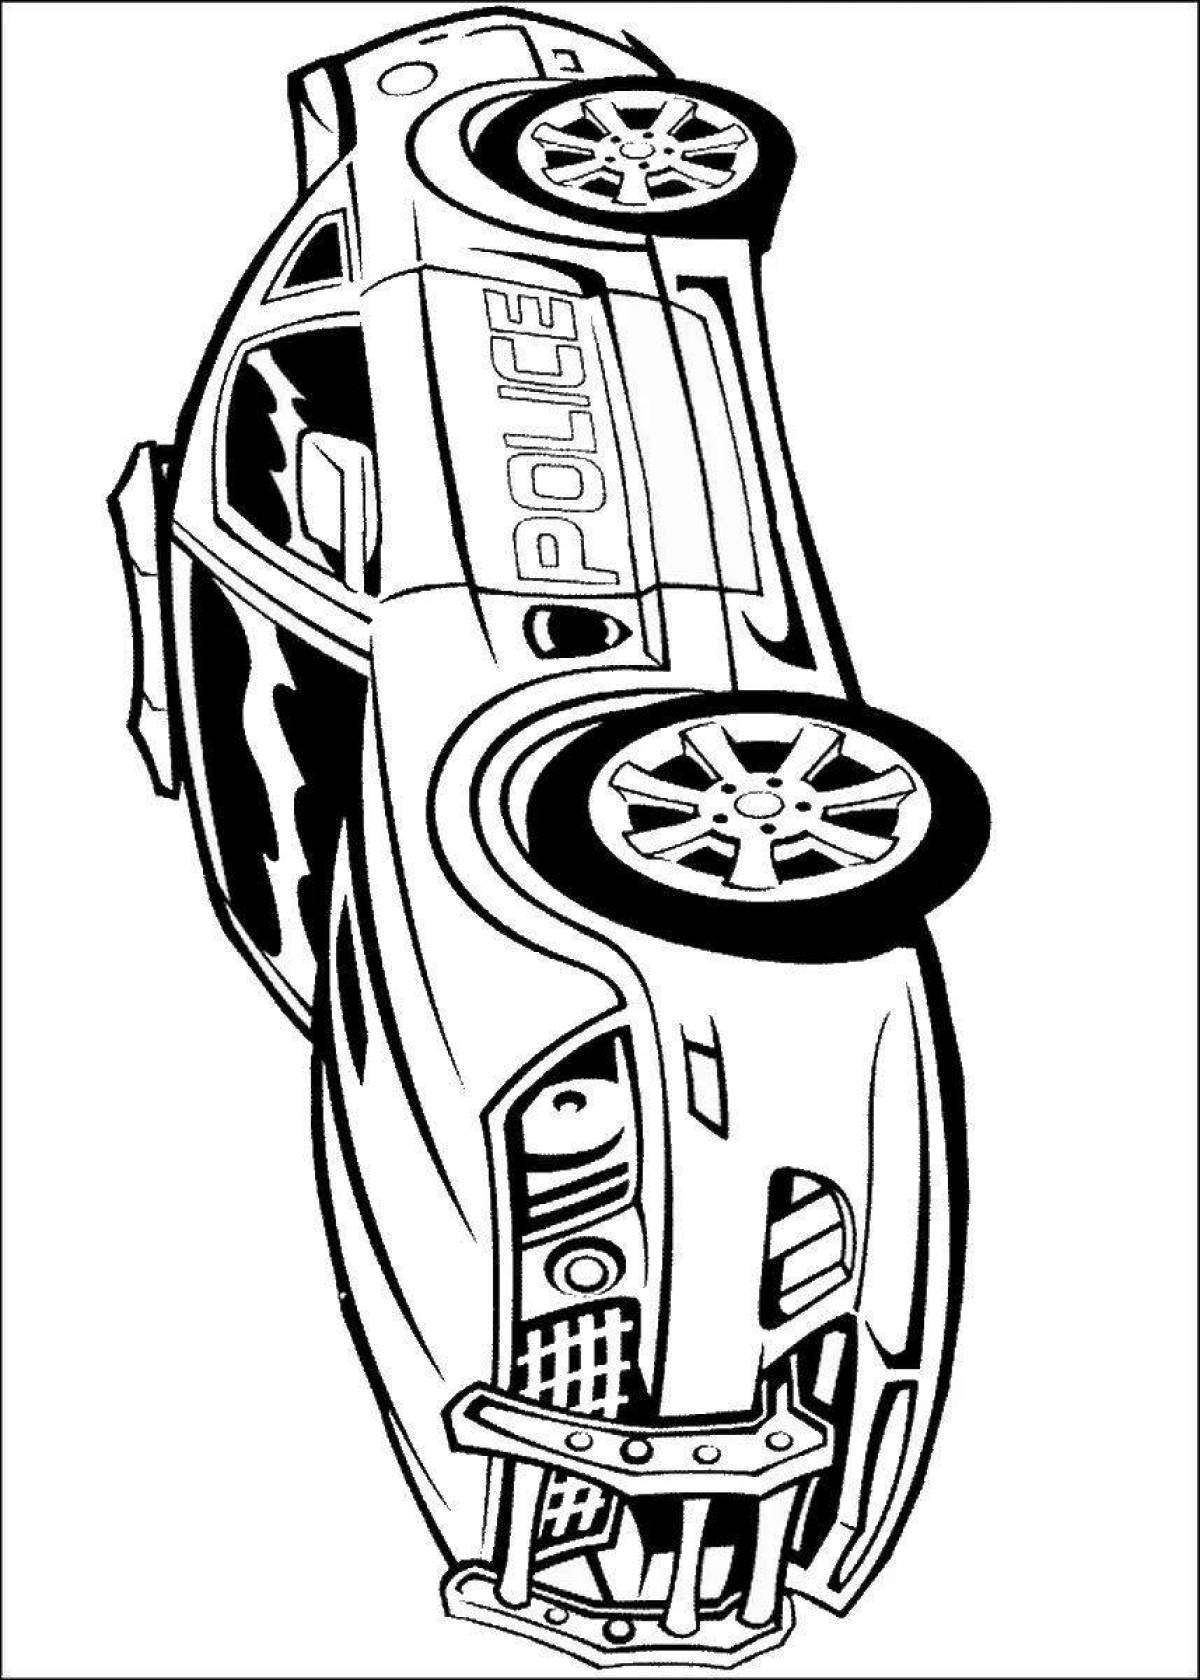 Coloring page joyful cars transformers